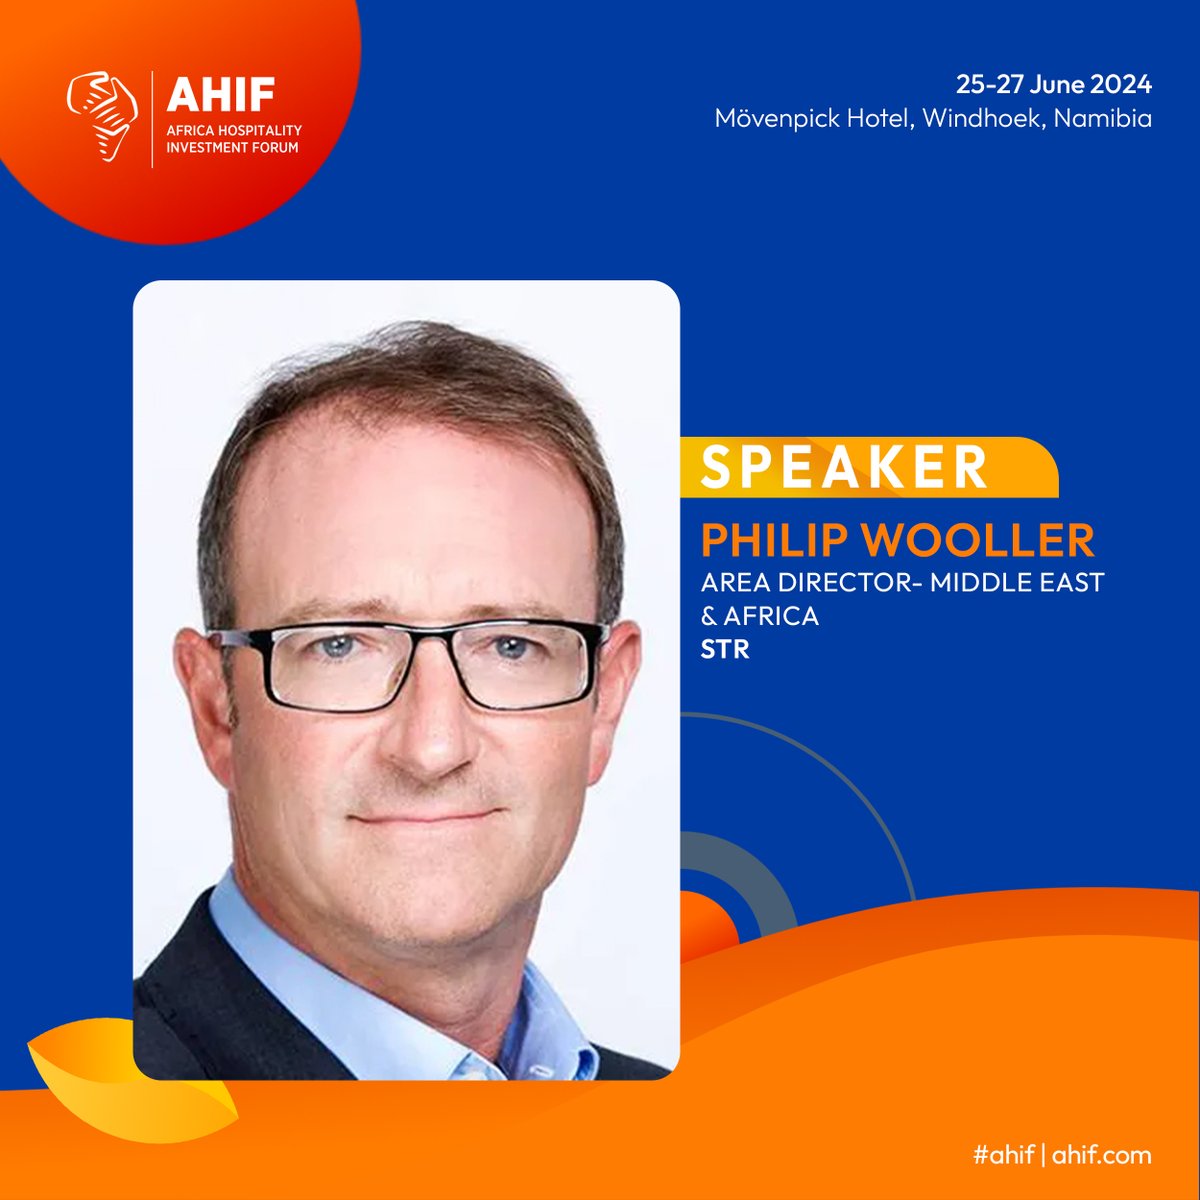 Philip Wooller, Area Director - Middle East & Africa, STR, joins the AHIF line up to give exclusive insights on the everchanging hospitality Industry. Register for AHIF today to get ahead of the curve and get access to exclusive industry insights! hubs.la/Q02rNVNj0